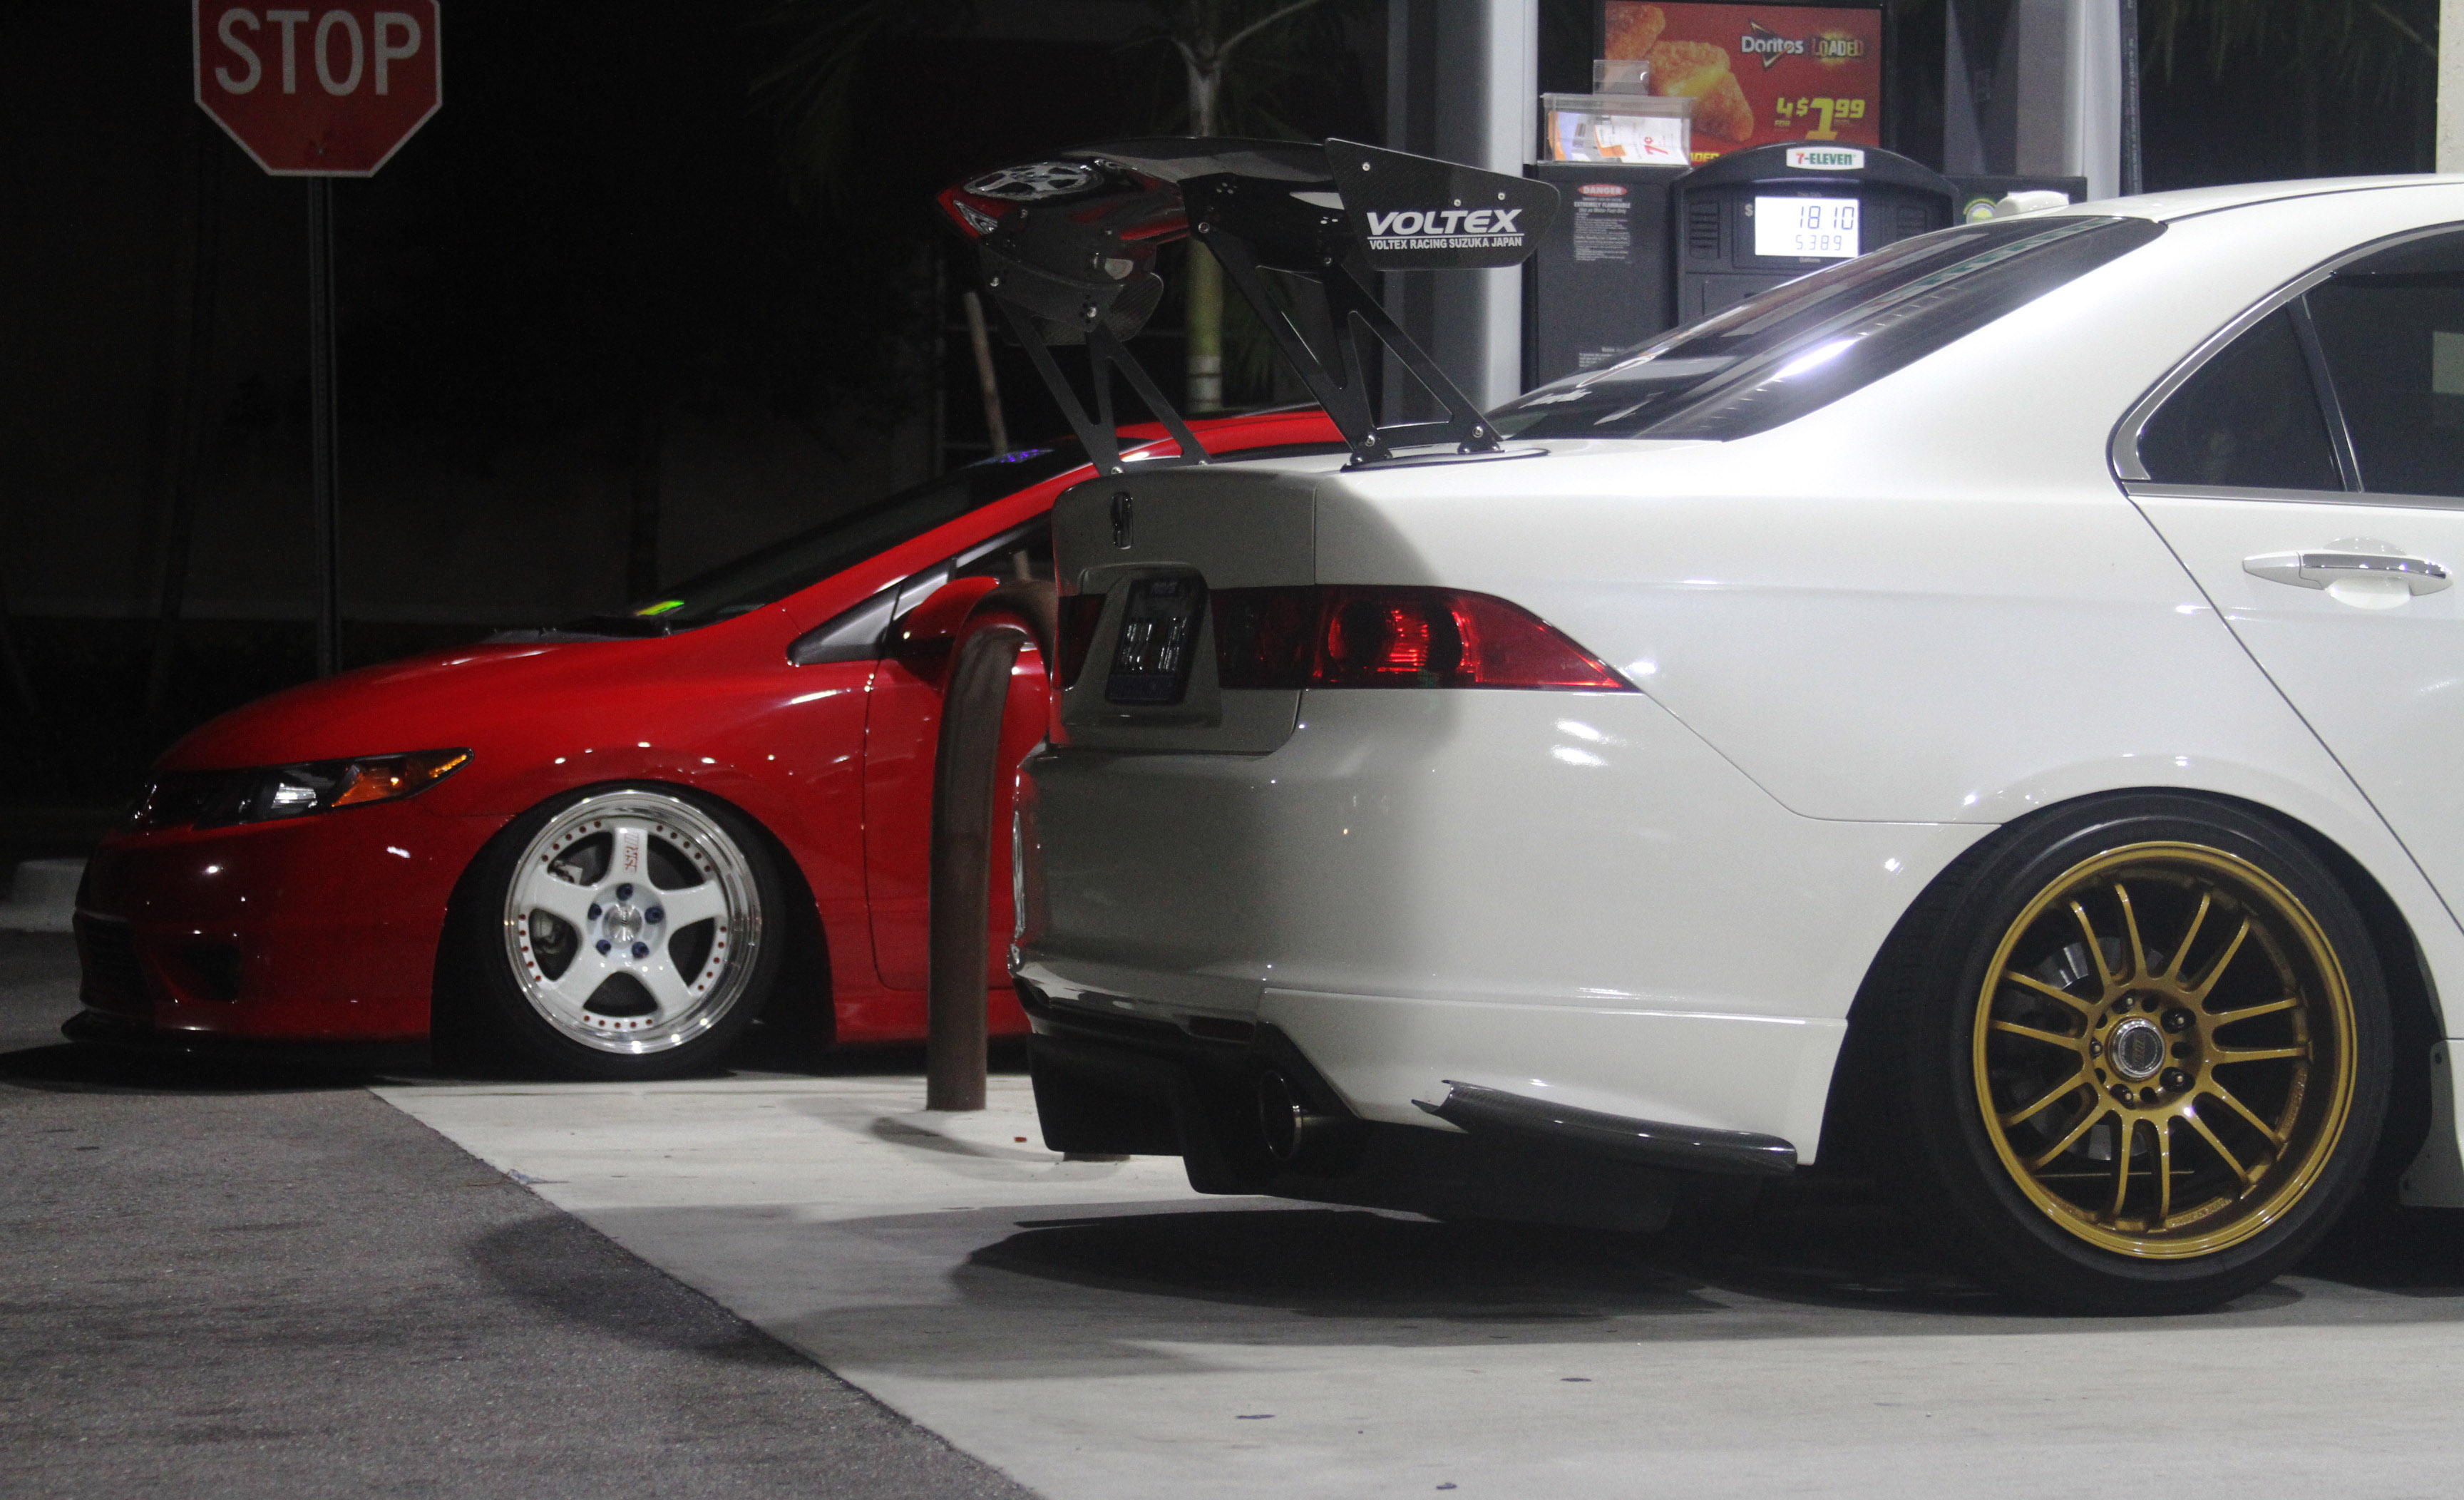 TSX and Civic